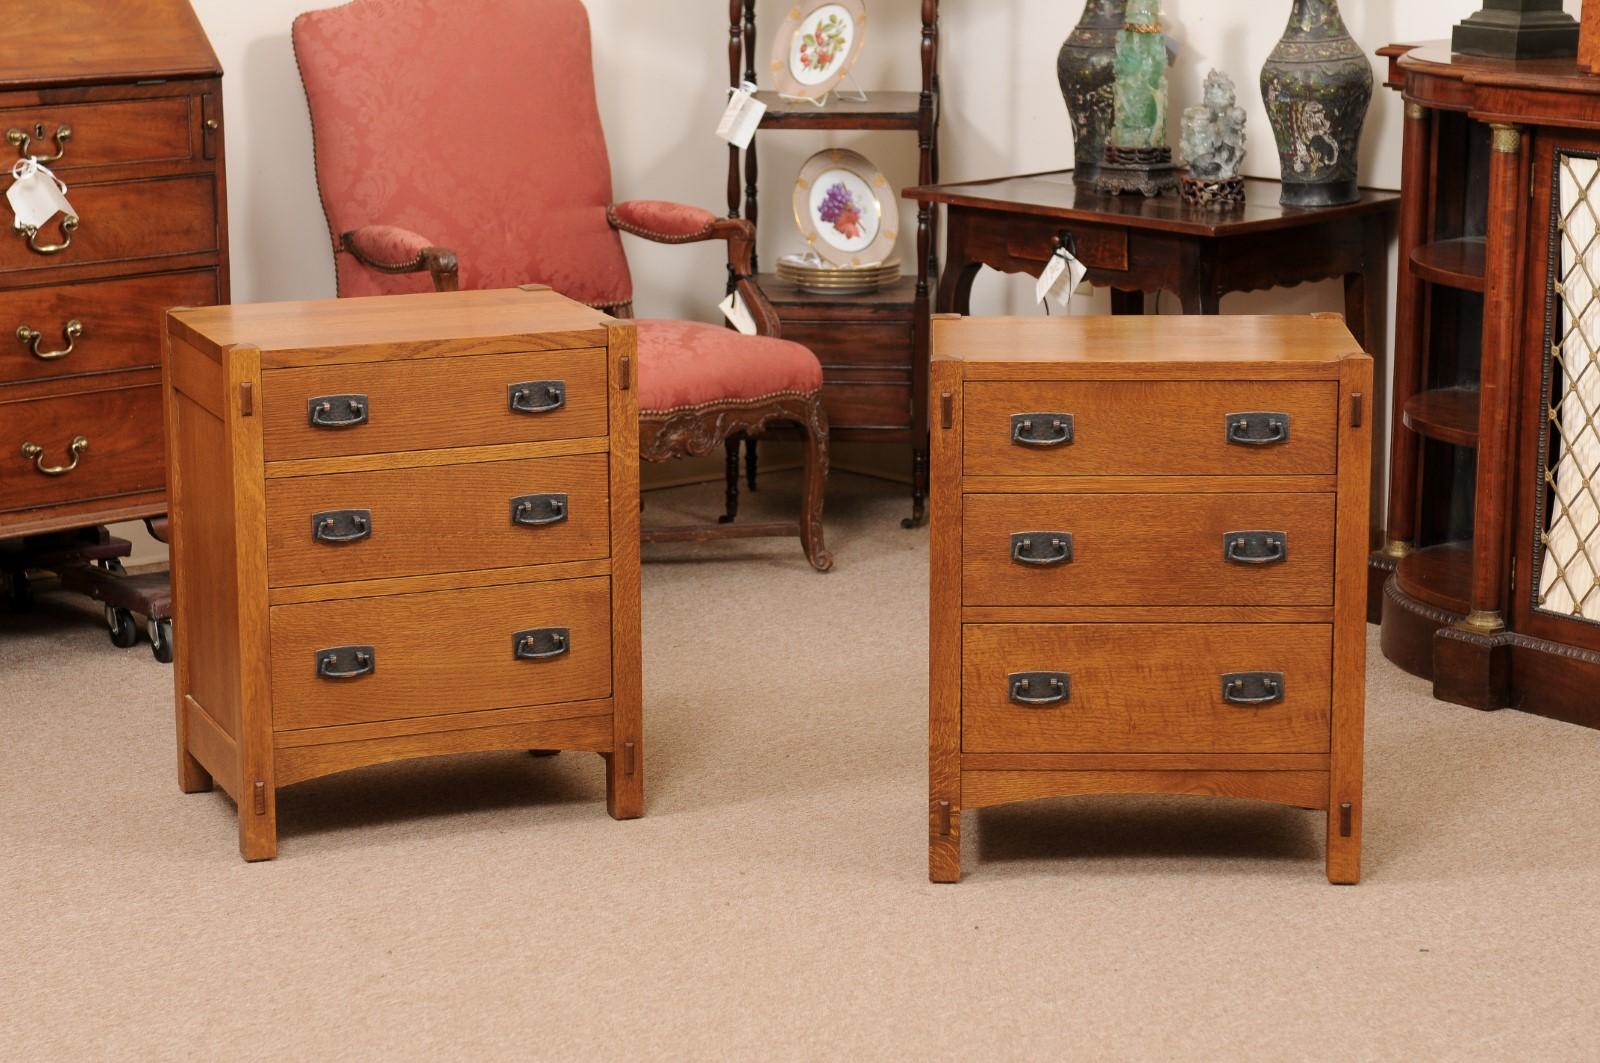 Pair of Stickley Mission Style Oak Nightstands / Side Tables with Drawers 5